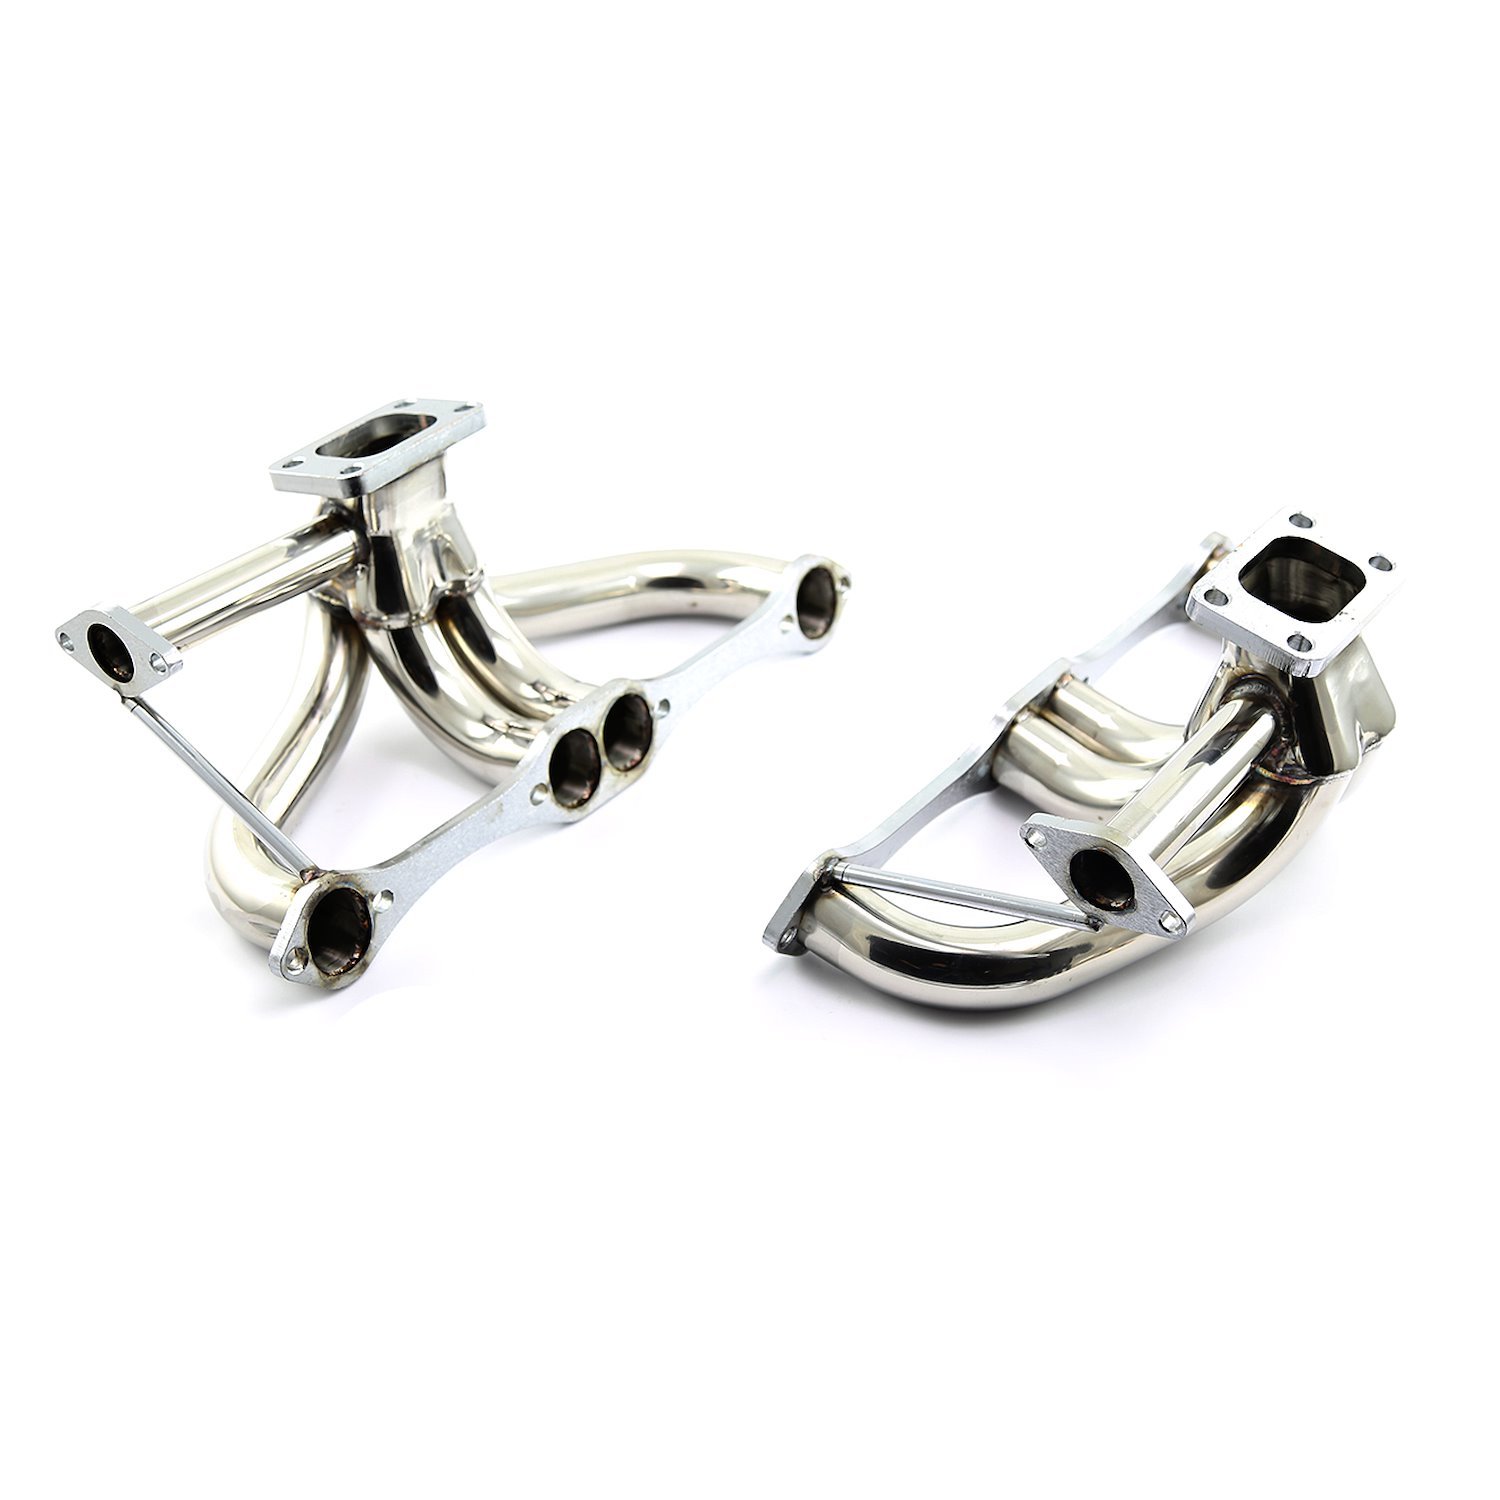 Dual Turbo T3 Exhaust Headers Small Block Chevy 350